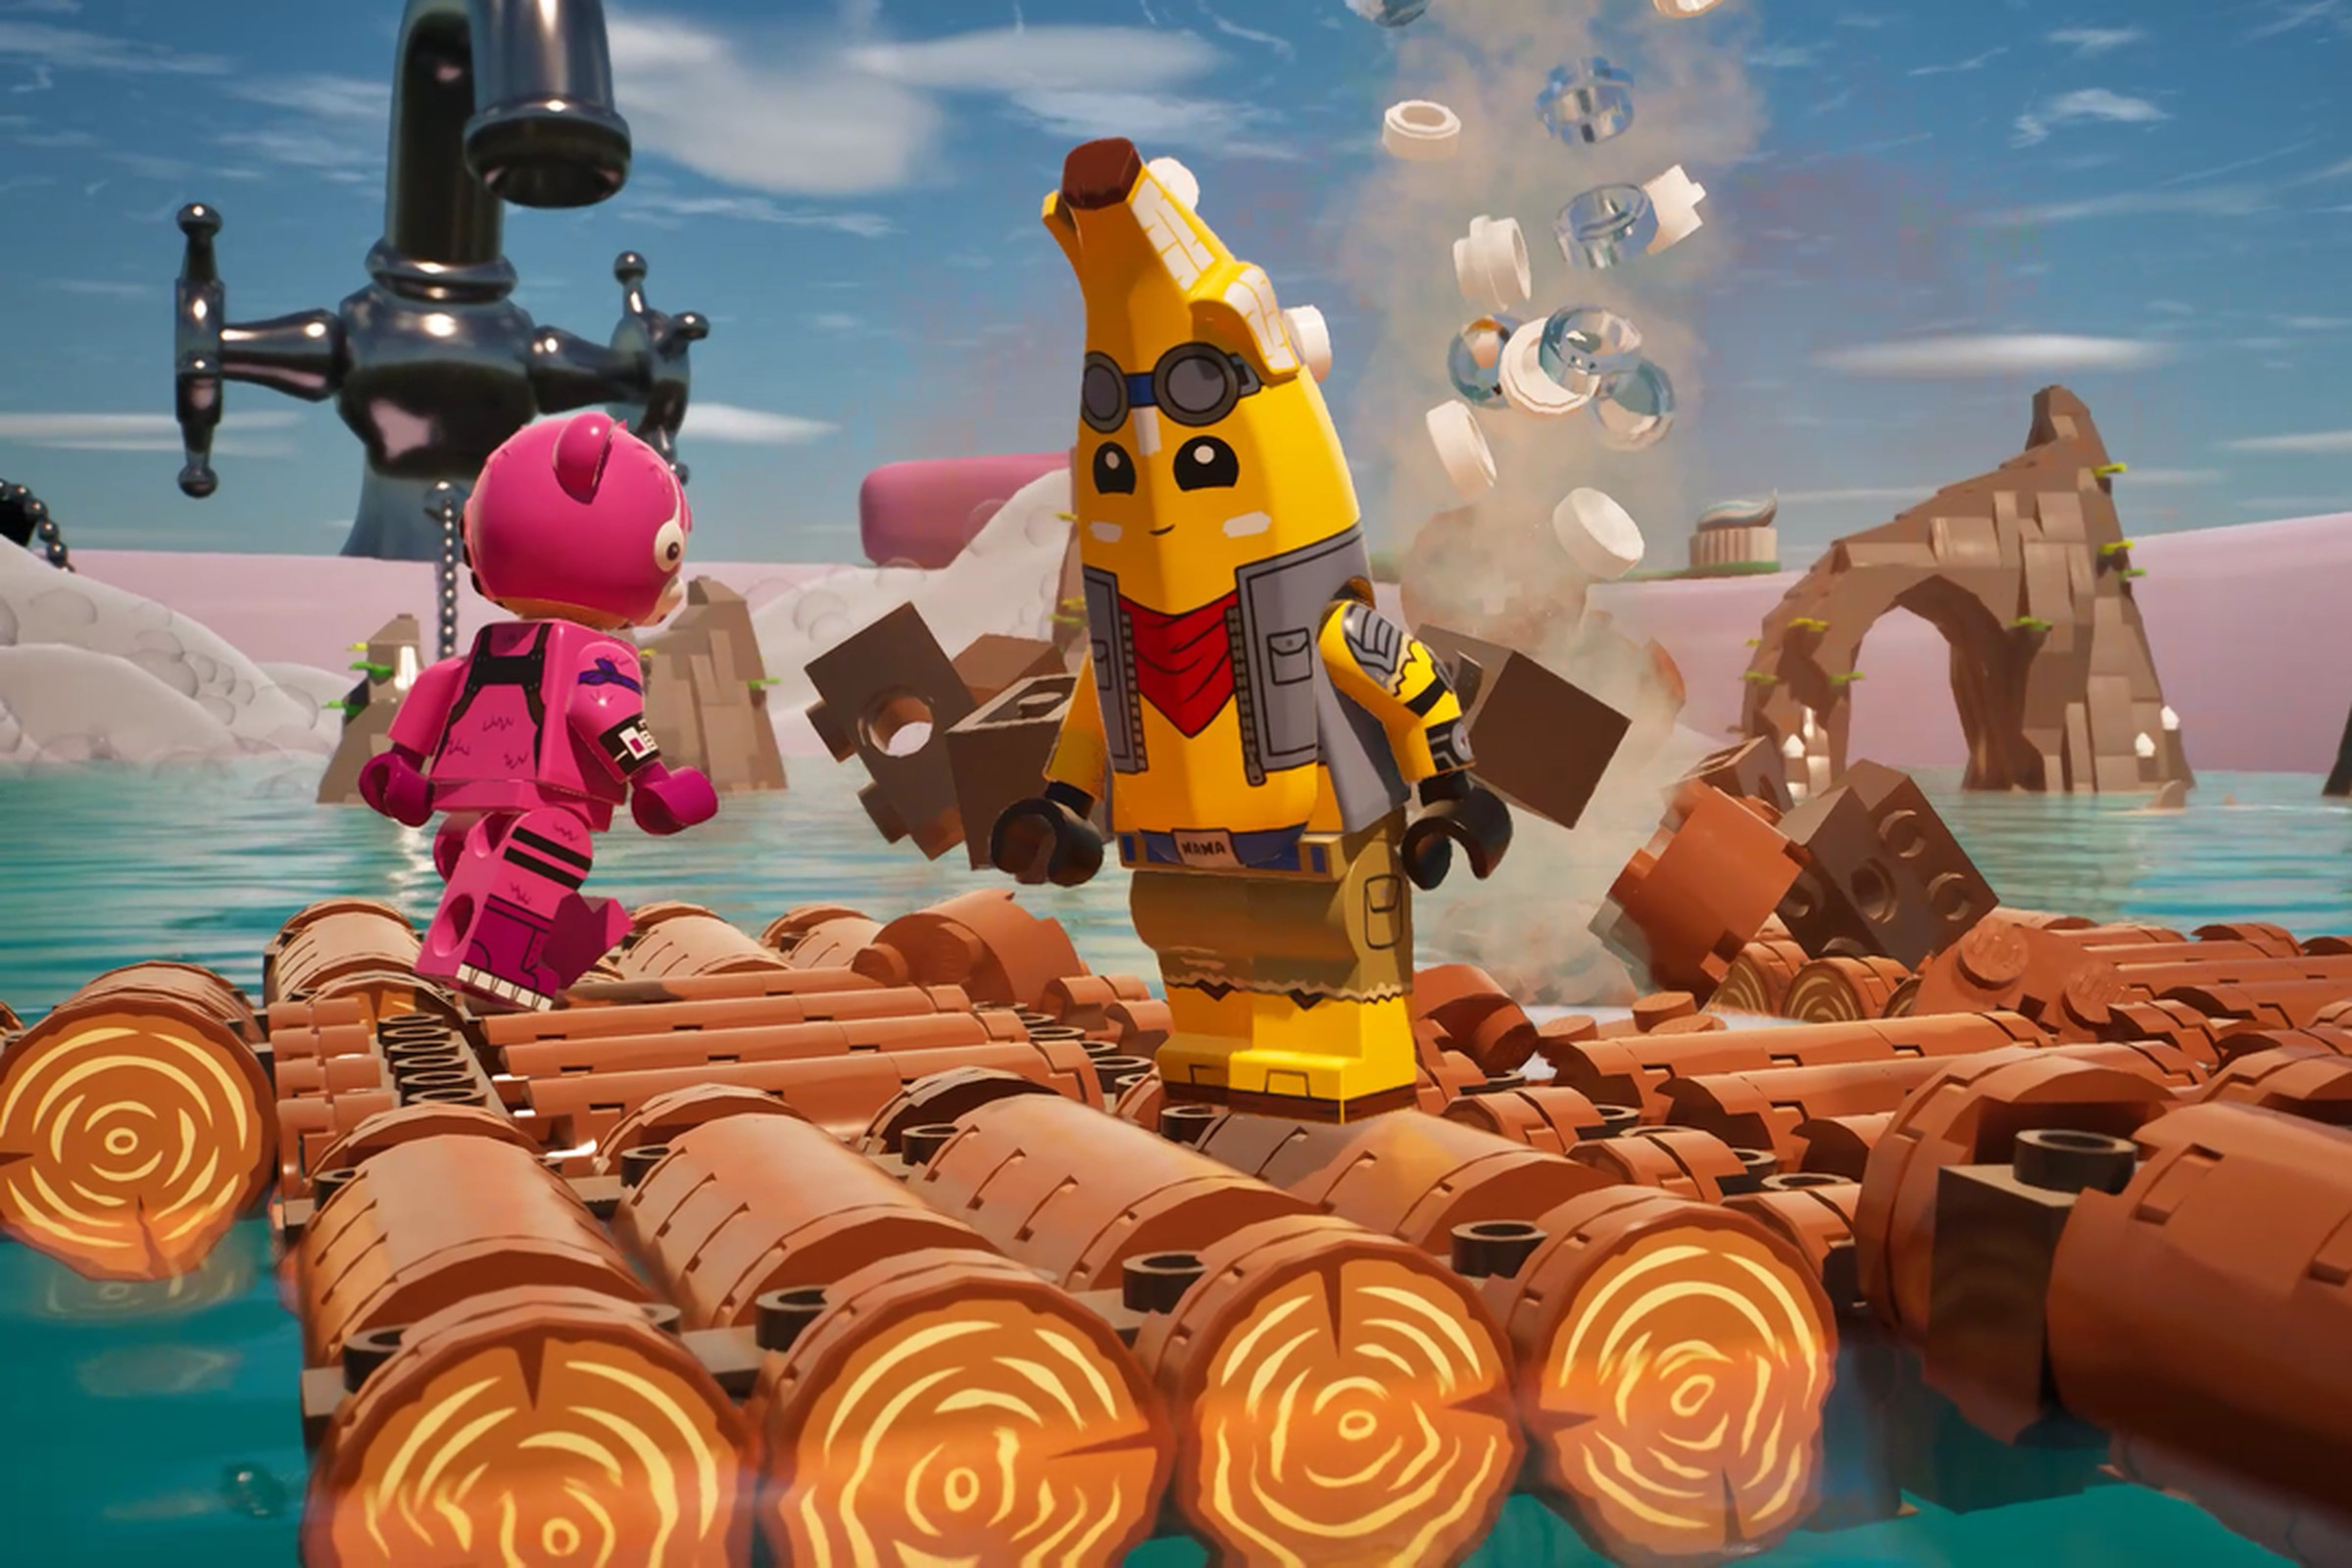 A screenshot from the Fortnite game Lego Raft Survival.